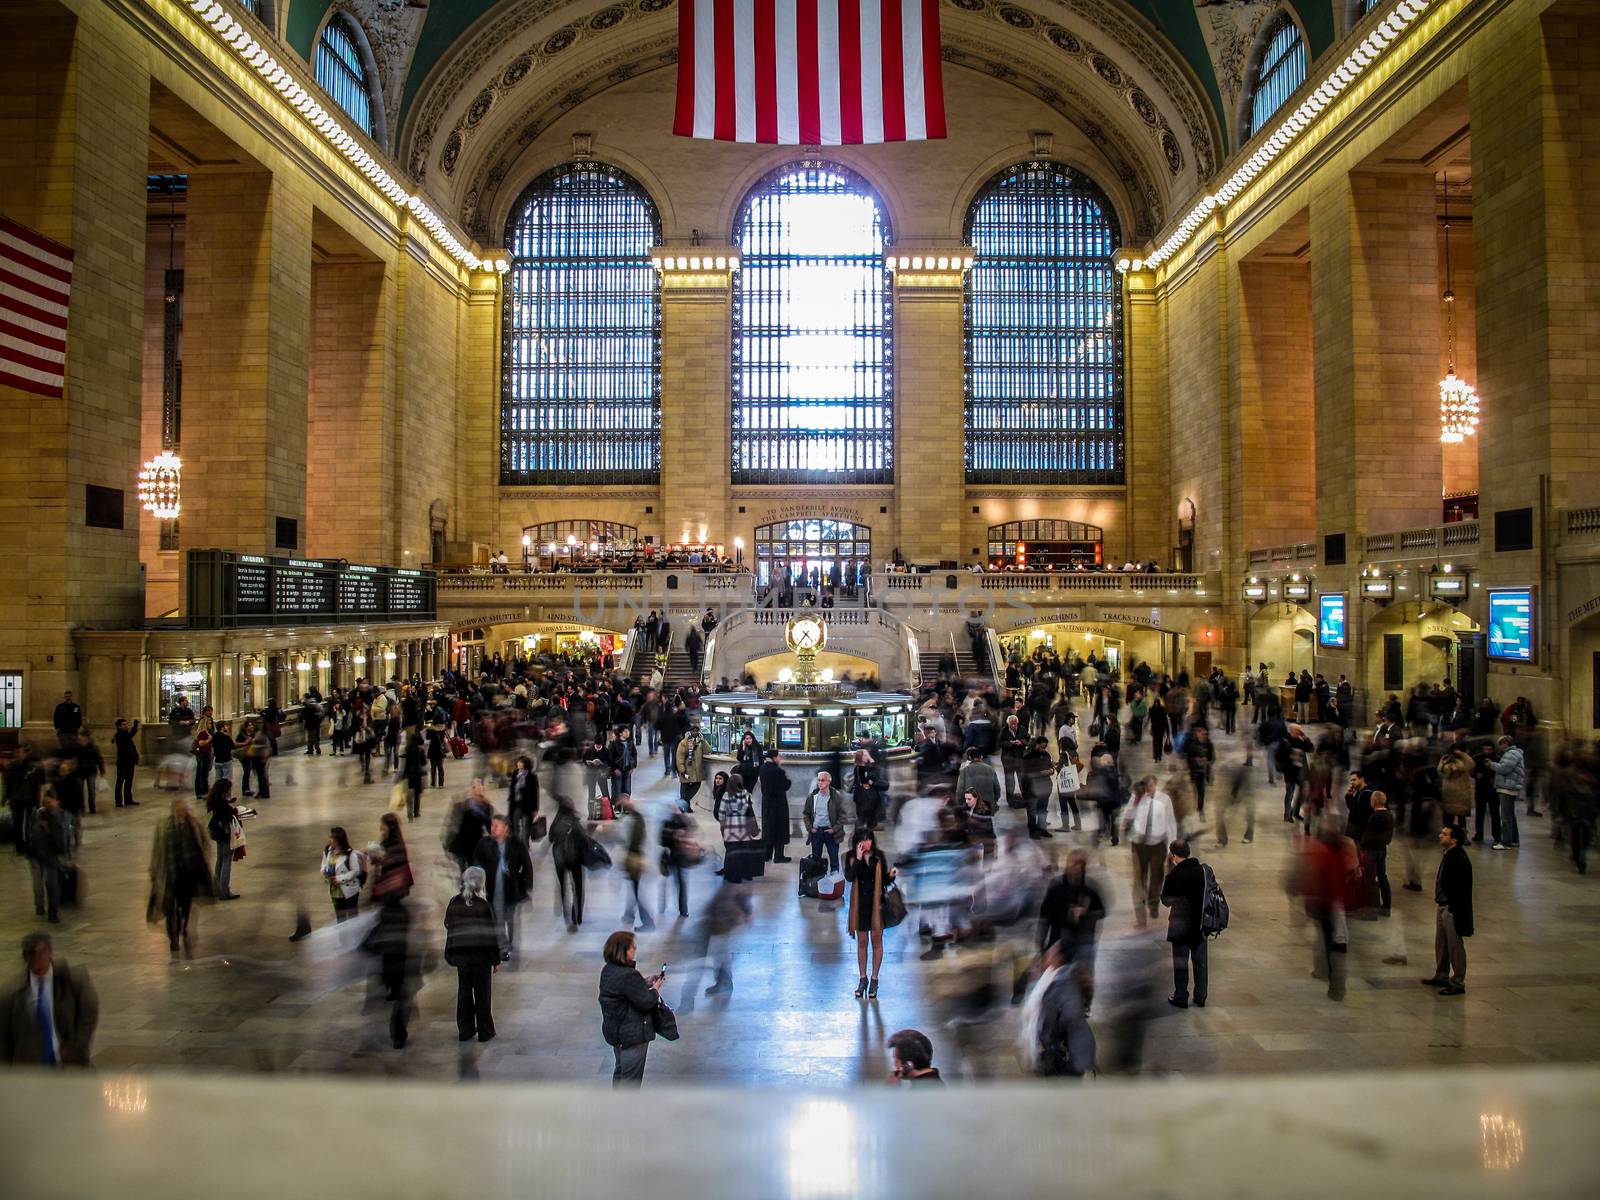 Inside Grand Central Station in New York City